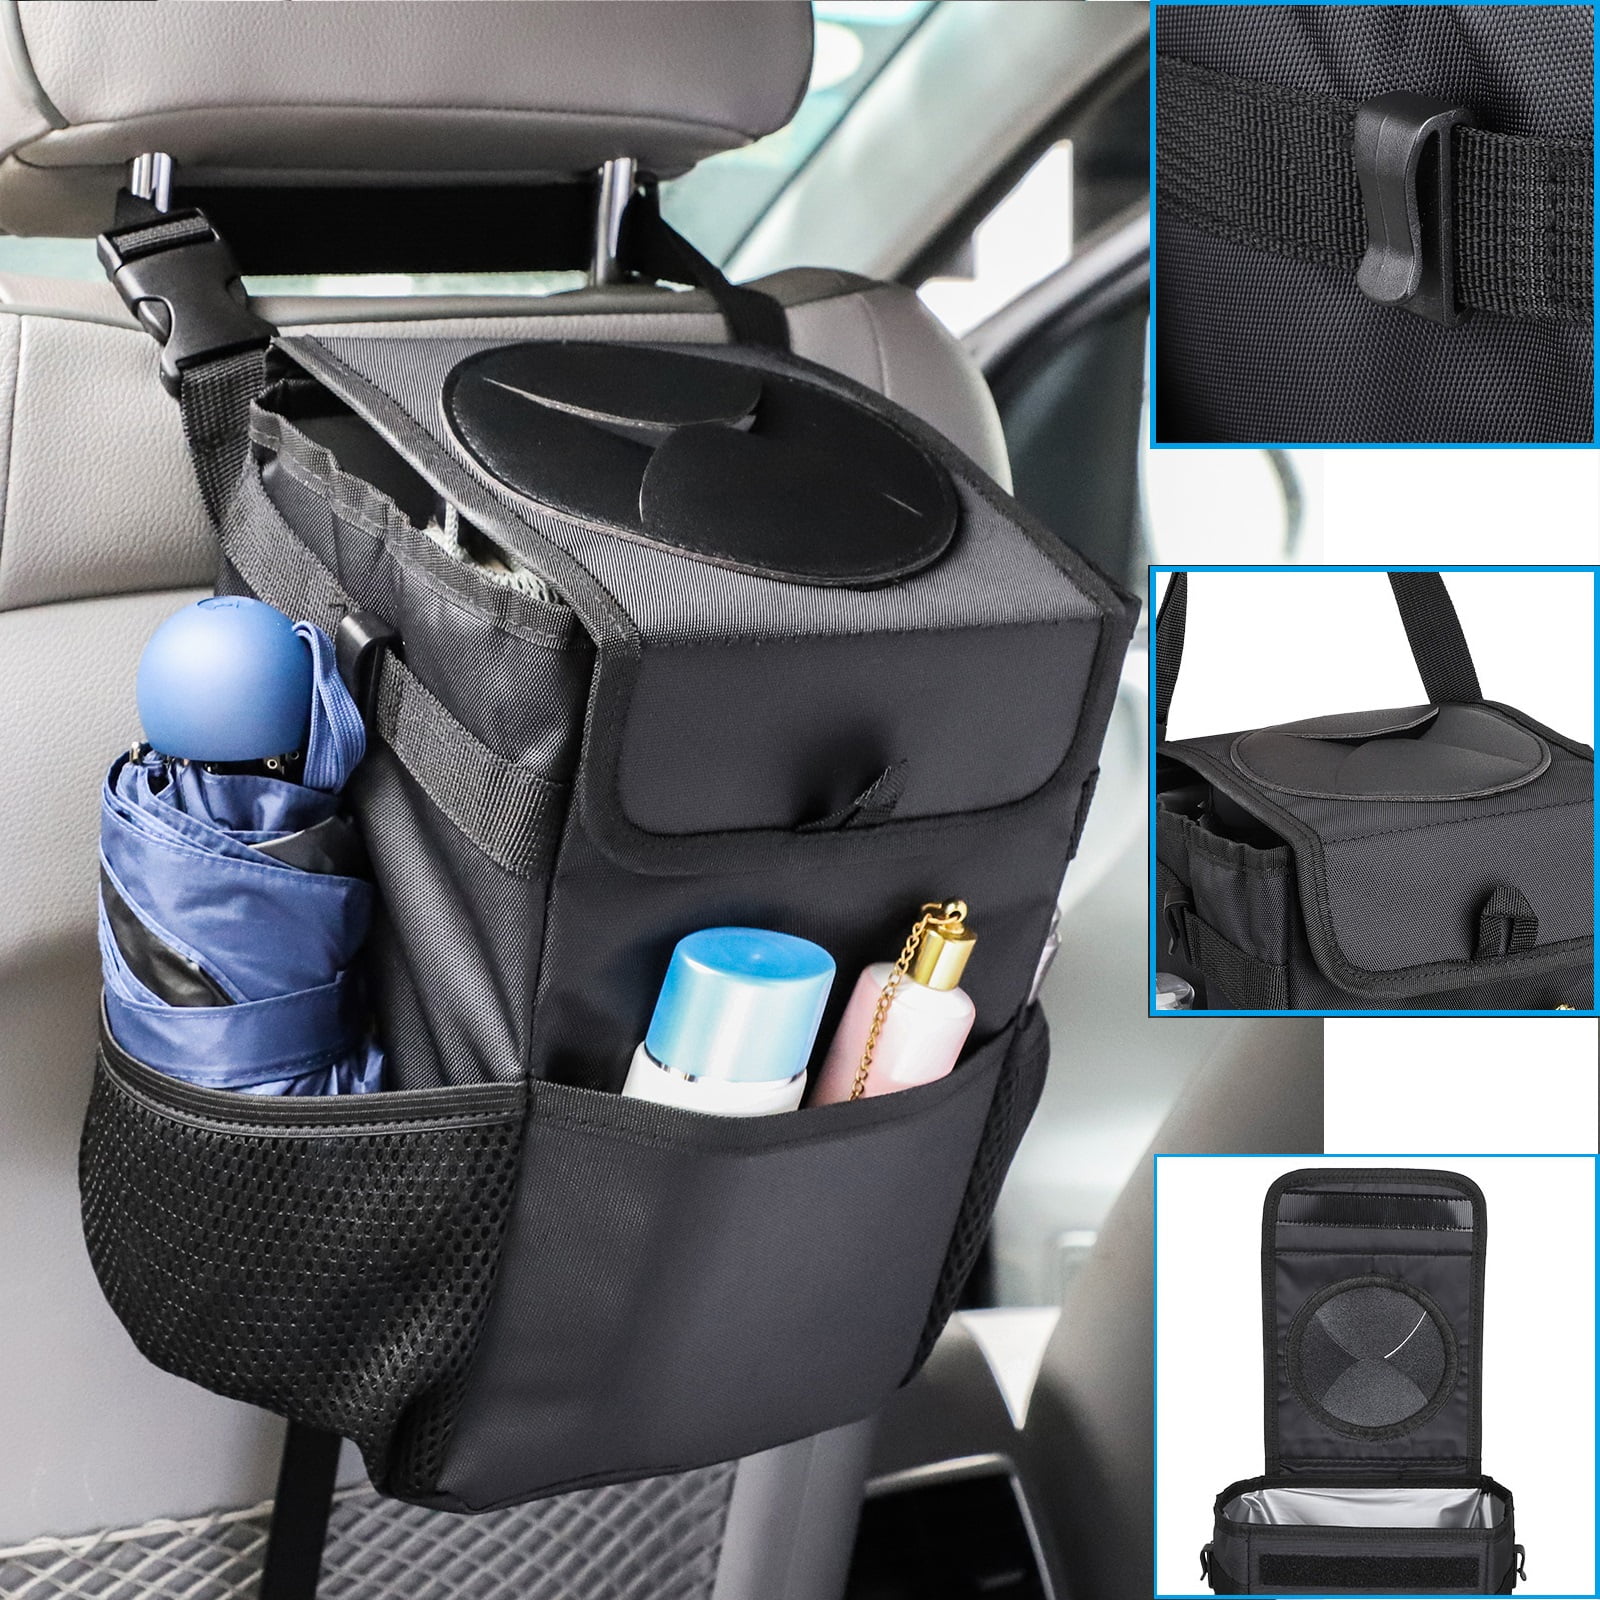 Waterproof Oxford Car Trash Can with Lid and 3 Storage Pocket,Foldable Car Garbage Can 1.6 Gallons Capacity,Hanging 100% Leak-Proof Inside Lining Car Organizer,Multipurpose Trash Bin for Car,Black 